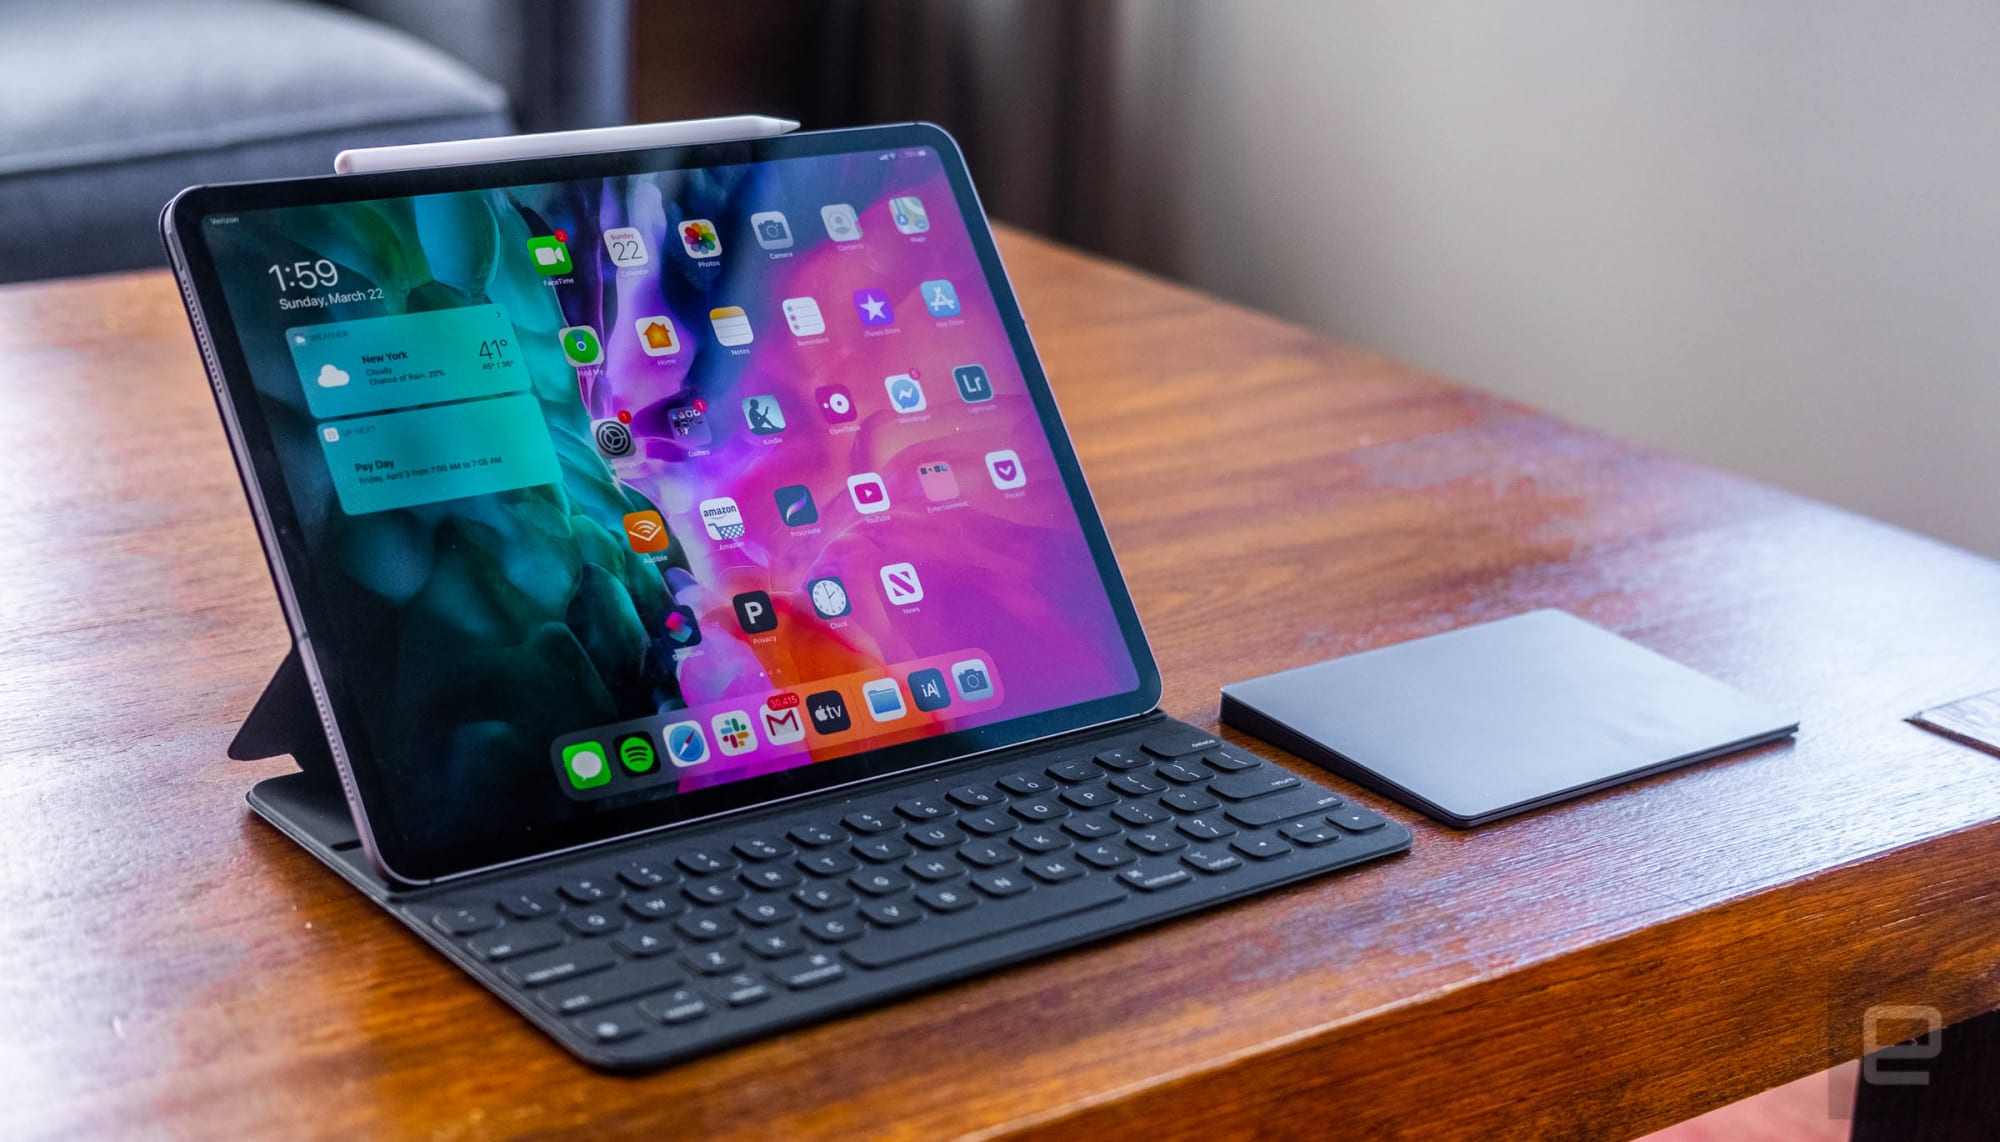 Apple iPad Pro 12.9 review: The rest is yet to come